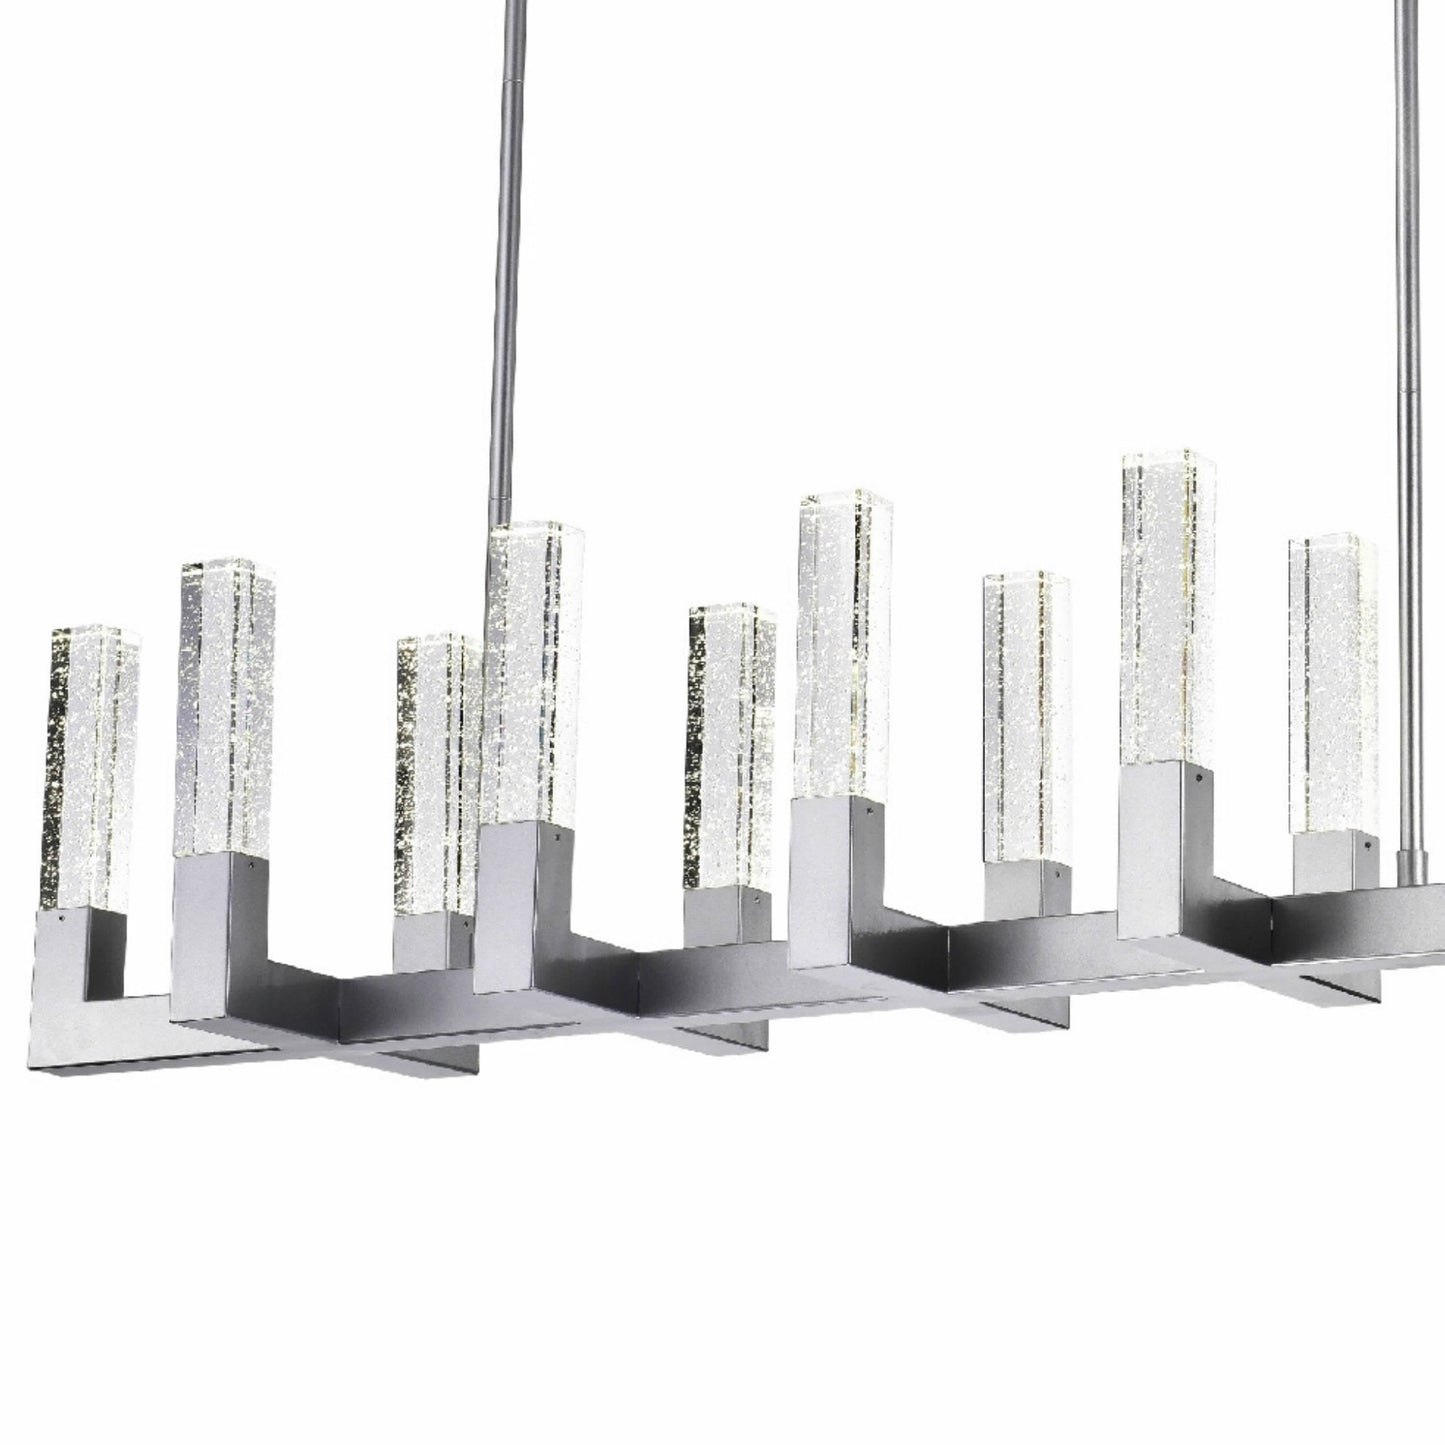 DIANYI 12 Light Rectangular Crystal LED Chandelier Canopy Silver